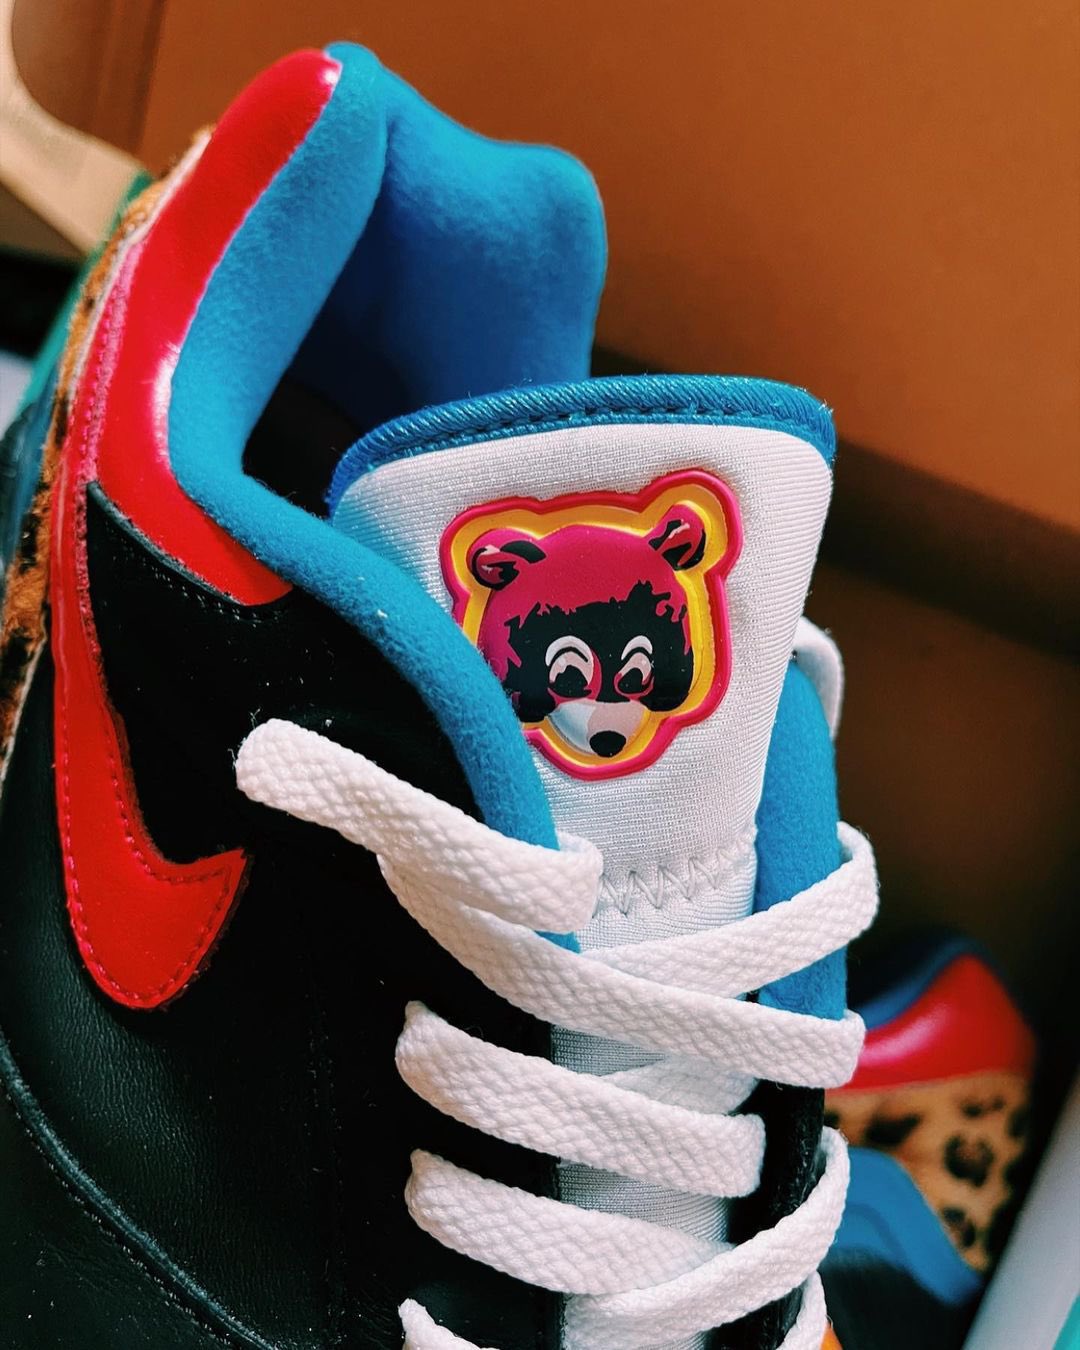 Ovrnundr on Twitter: "Kanye West x Nike Air Max 180 sample. Made in 2005 by Don C and Christopher Bevans commemorate West's debut album "The College Dropout". The bear on